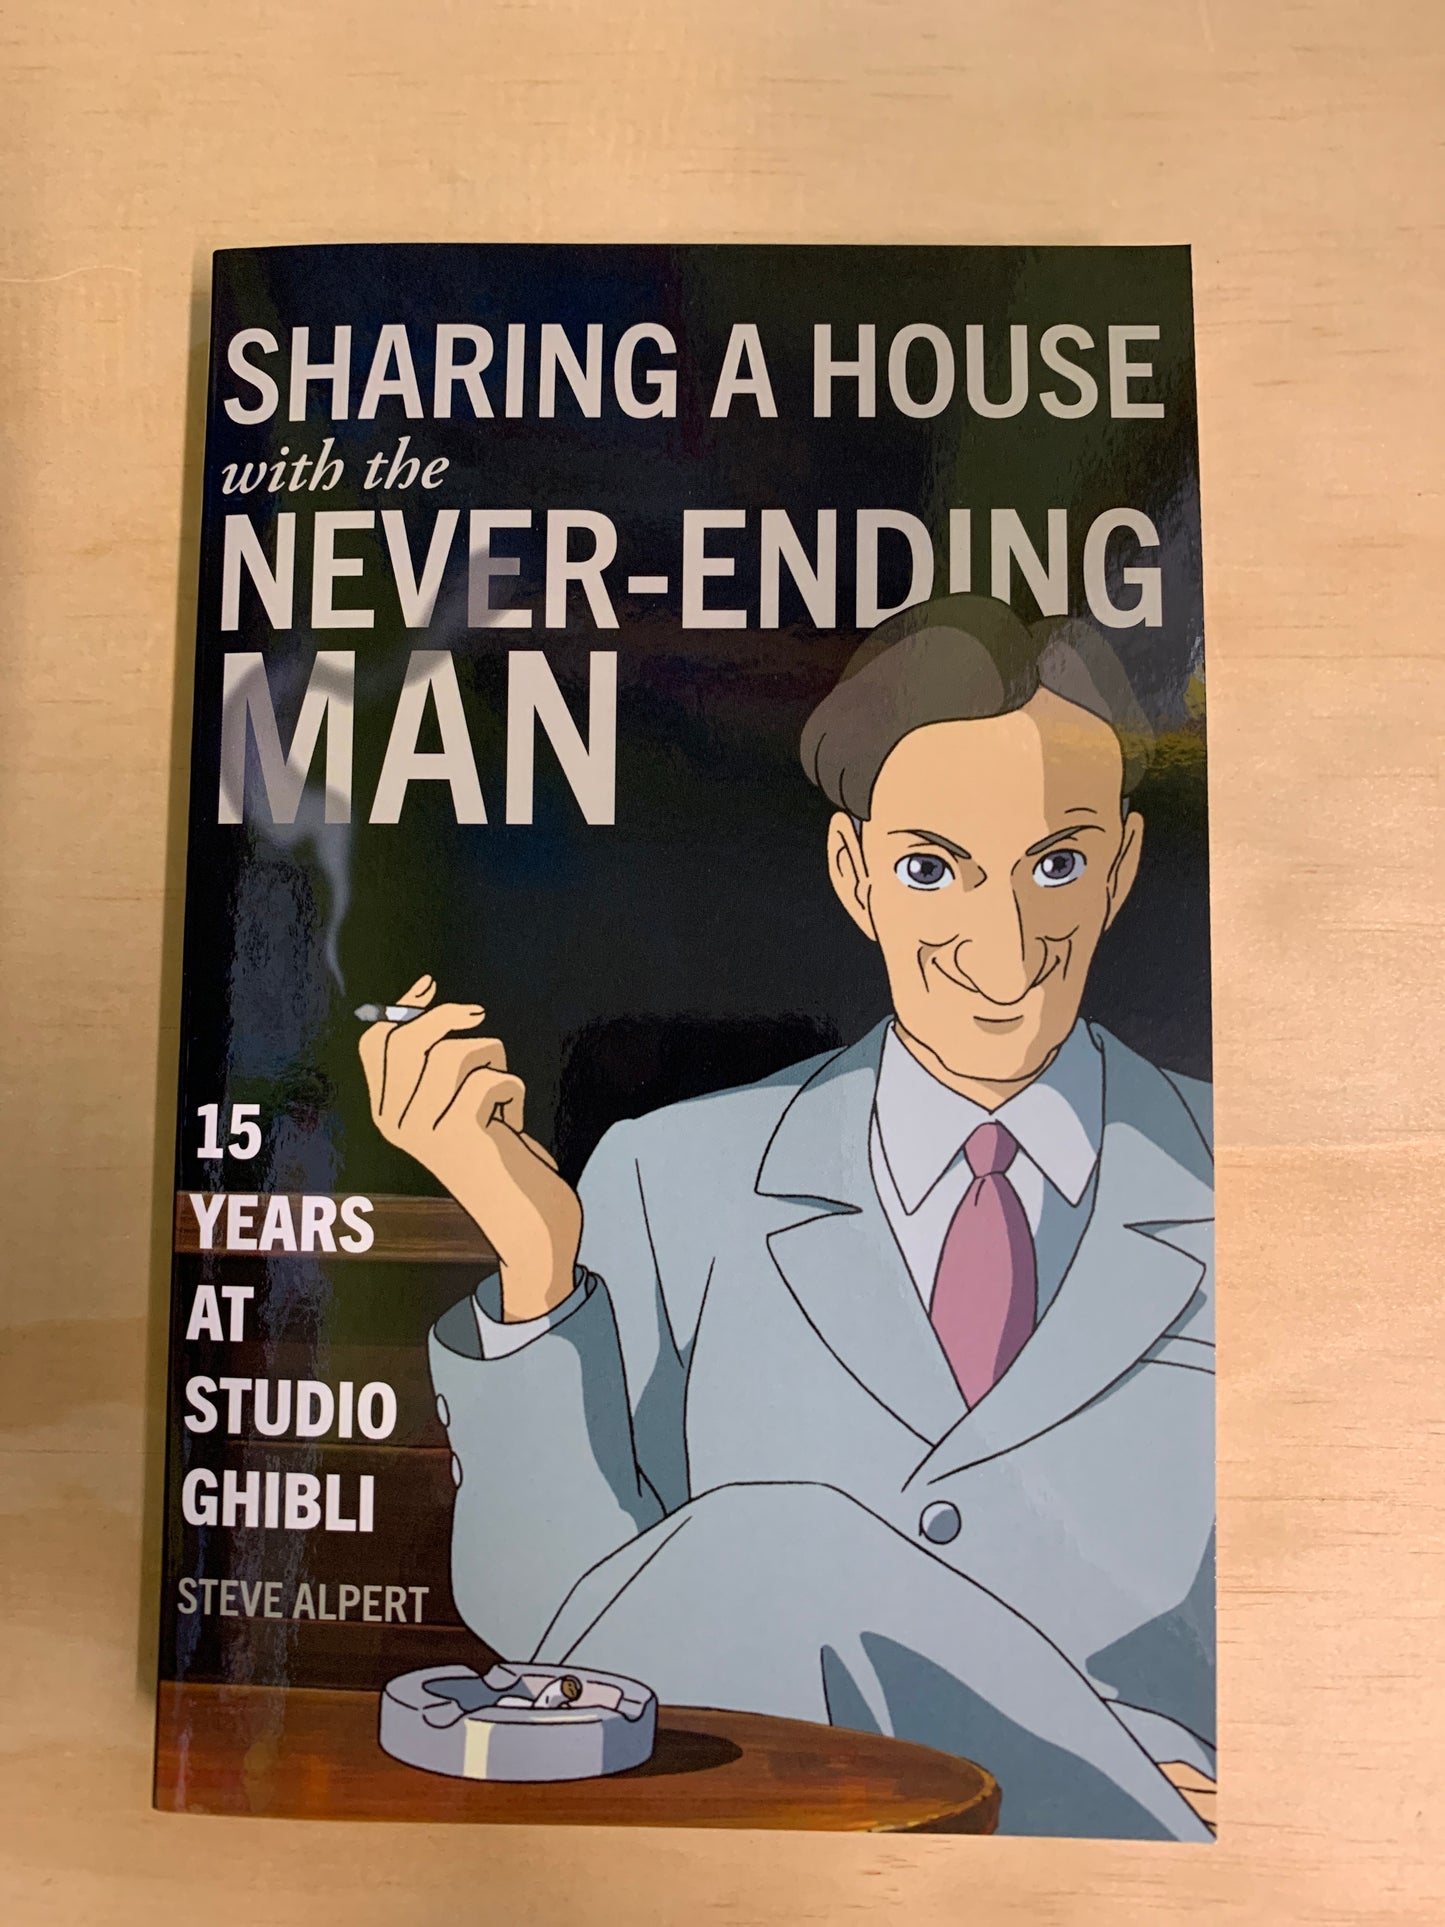 Sharing a House with the Never-Ending Man